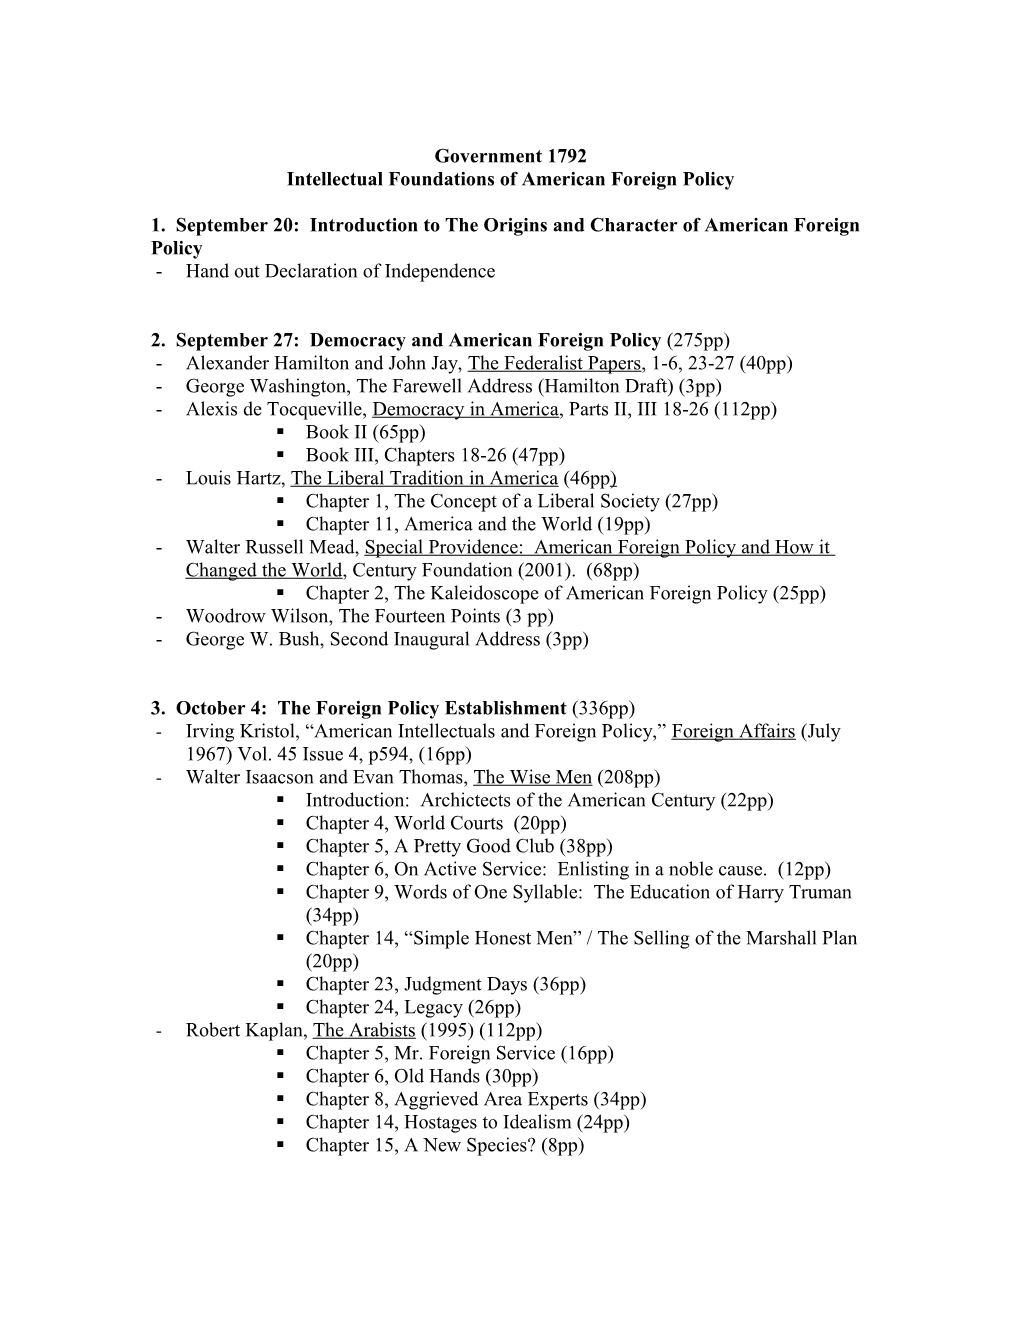 Intellectual Foundations of American Foreign Policy